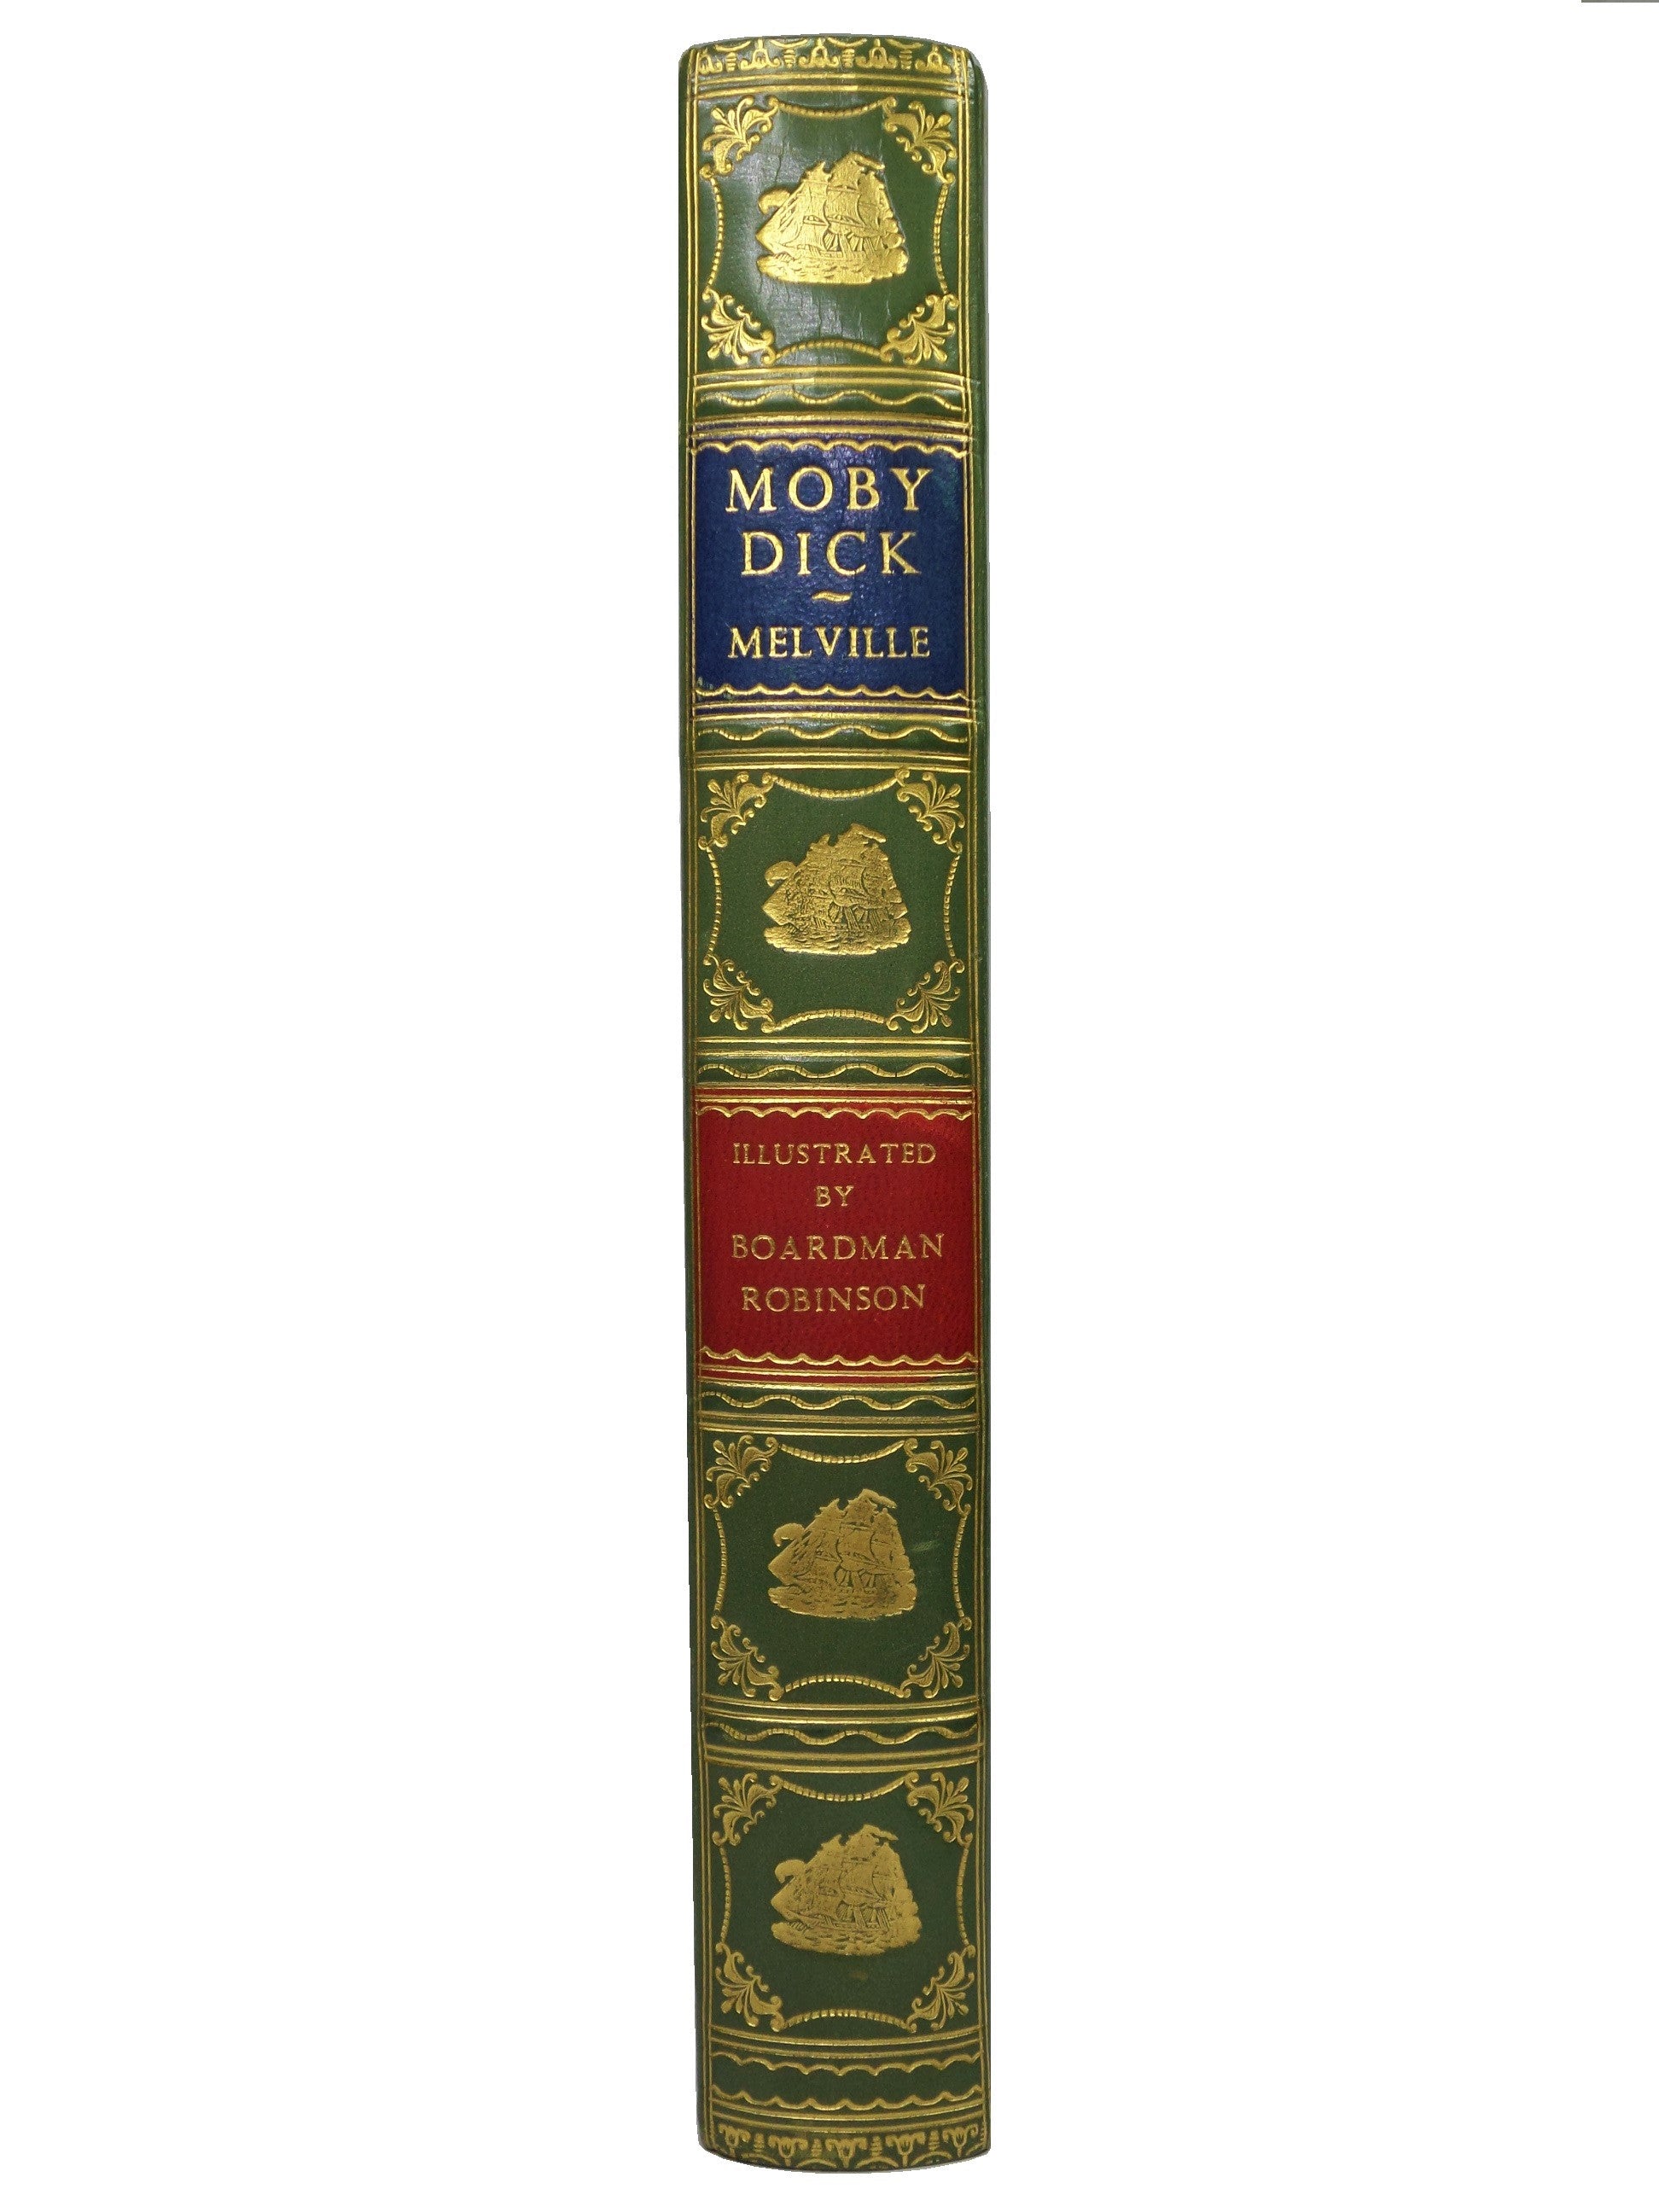 MOBY DICK BY HERMAN MELVILLE 1943 FINE LEATHER BINDING BY BAYNTUN